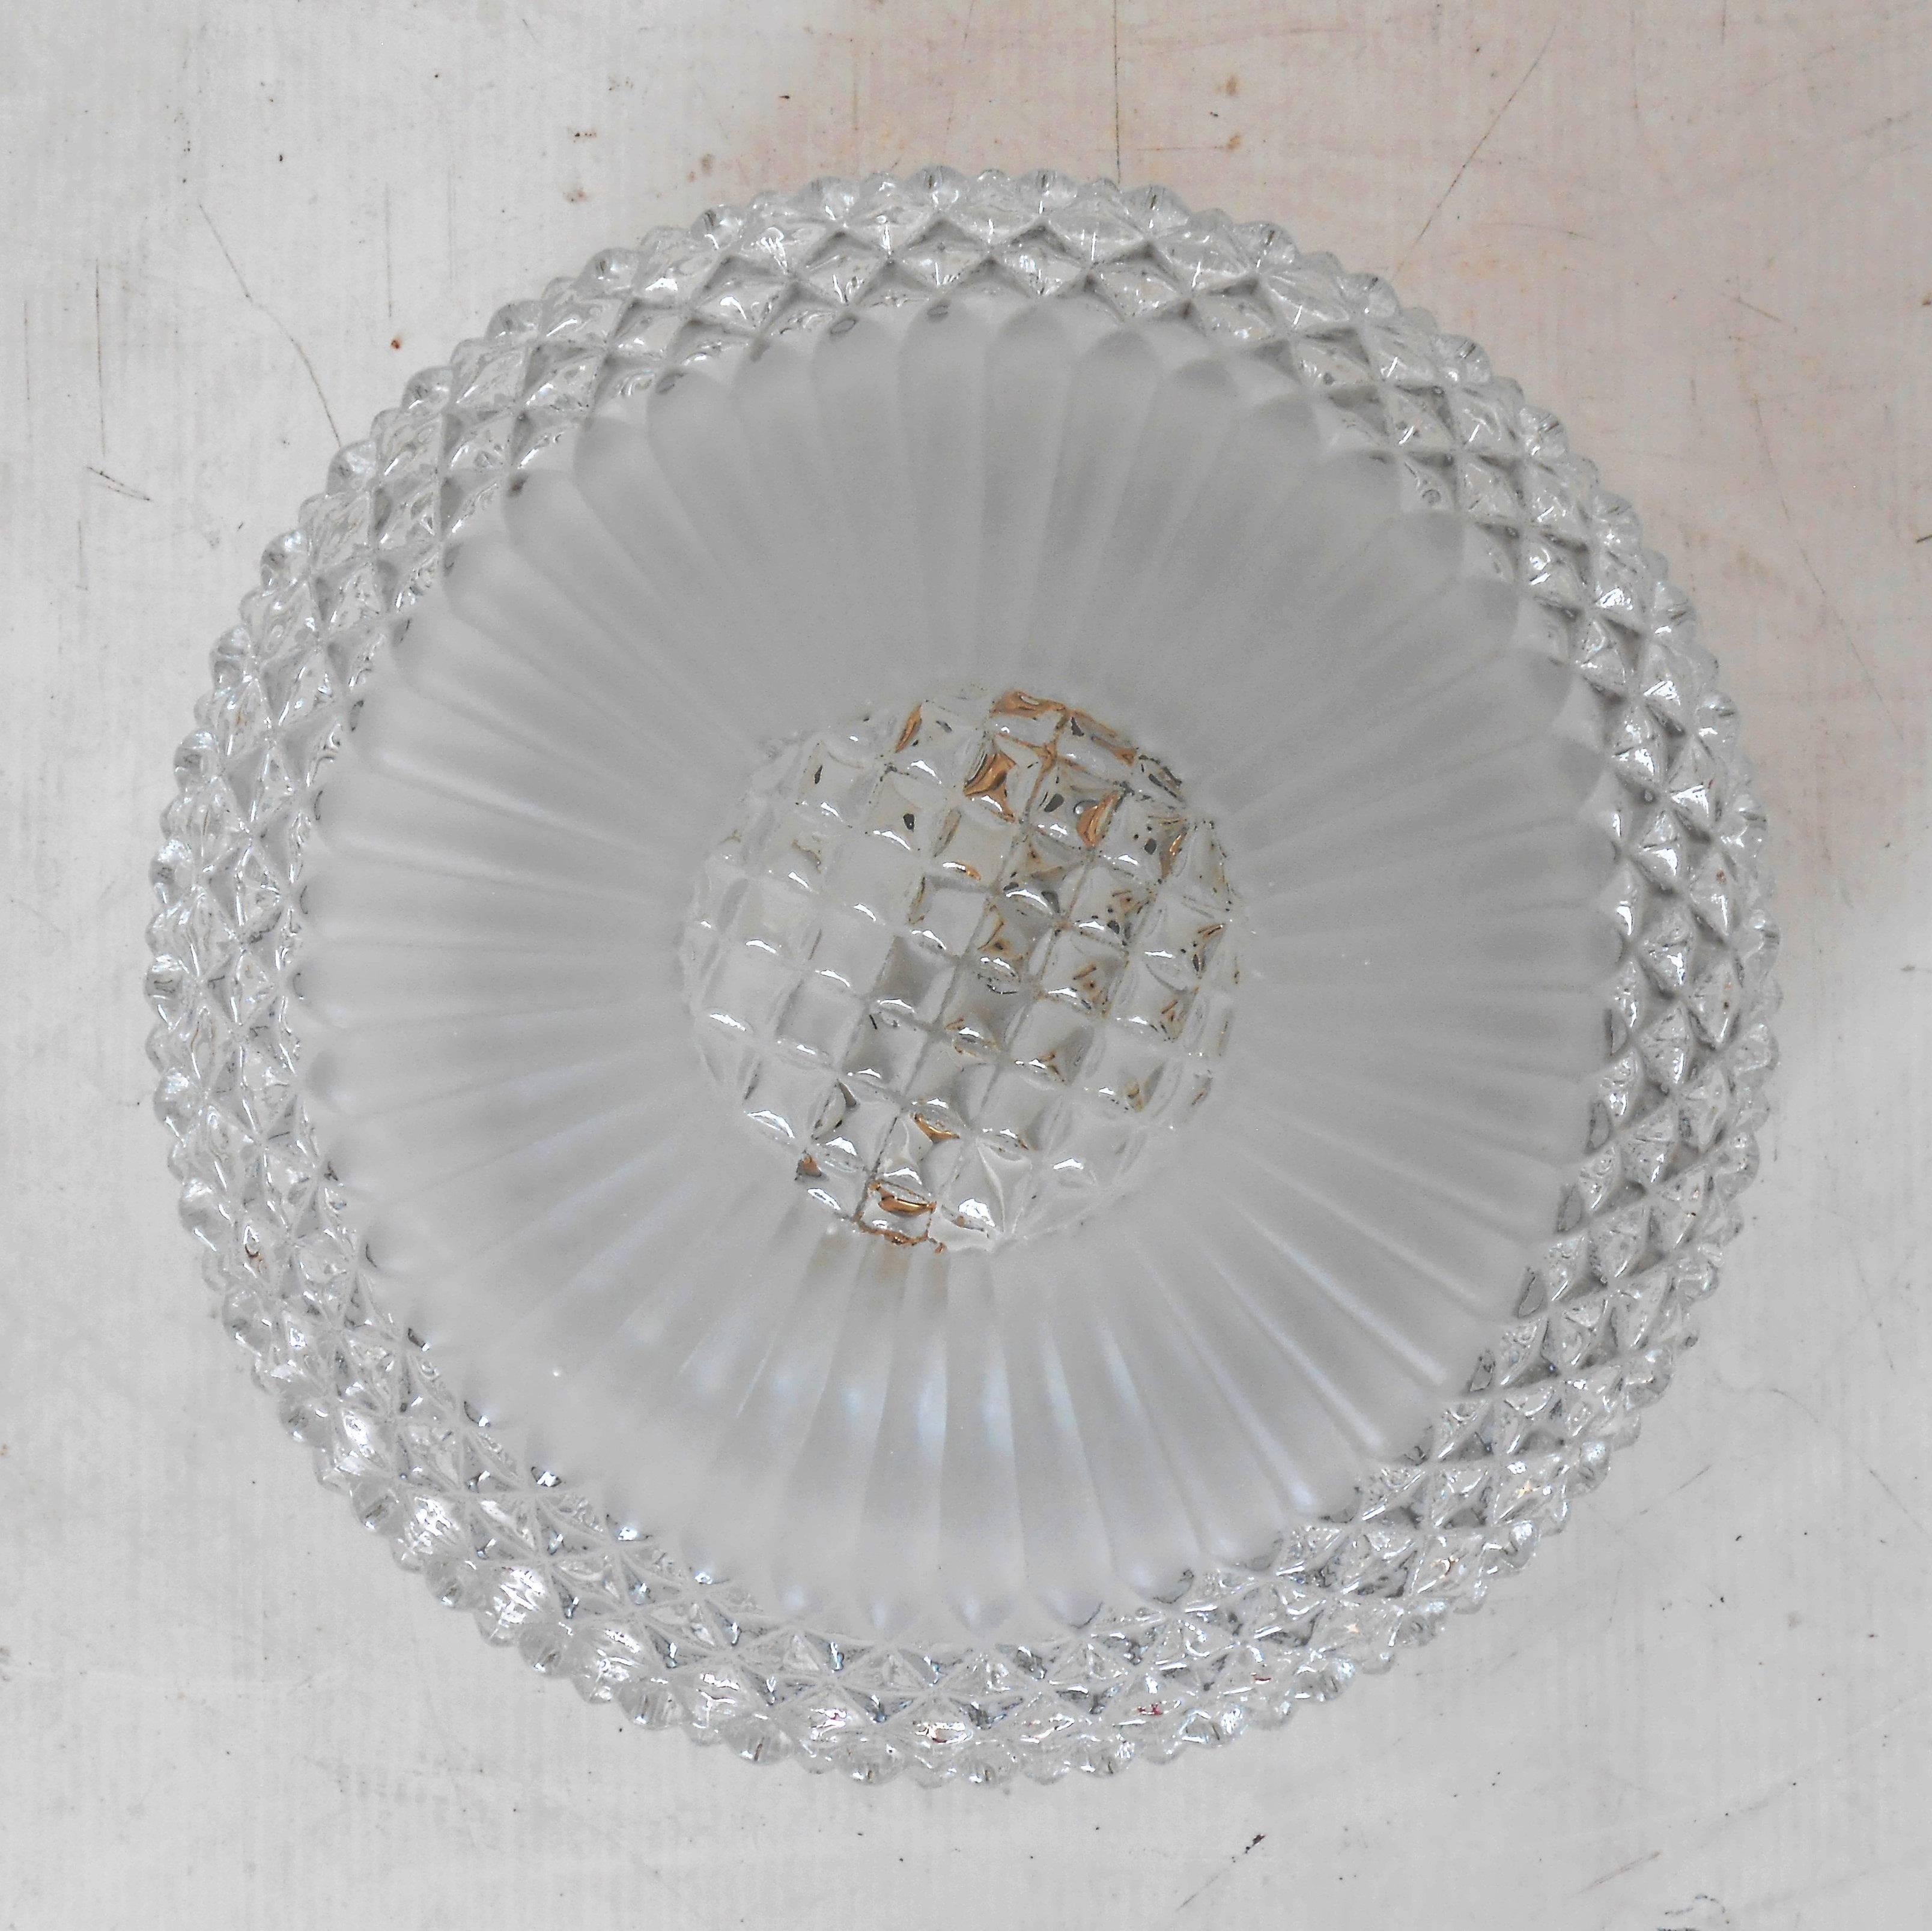 Vintage Italian flush mount or wall light shown in clear textured Murano glass, mounted on metal frame / Made in Italy circa 1960’s
2 lights / E12 or E14 type / max 40W each
Diameter: 9.5 inches / Height: 4 inches
1 in stock in Palm Springs